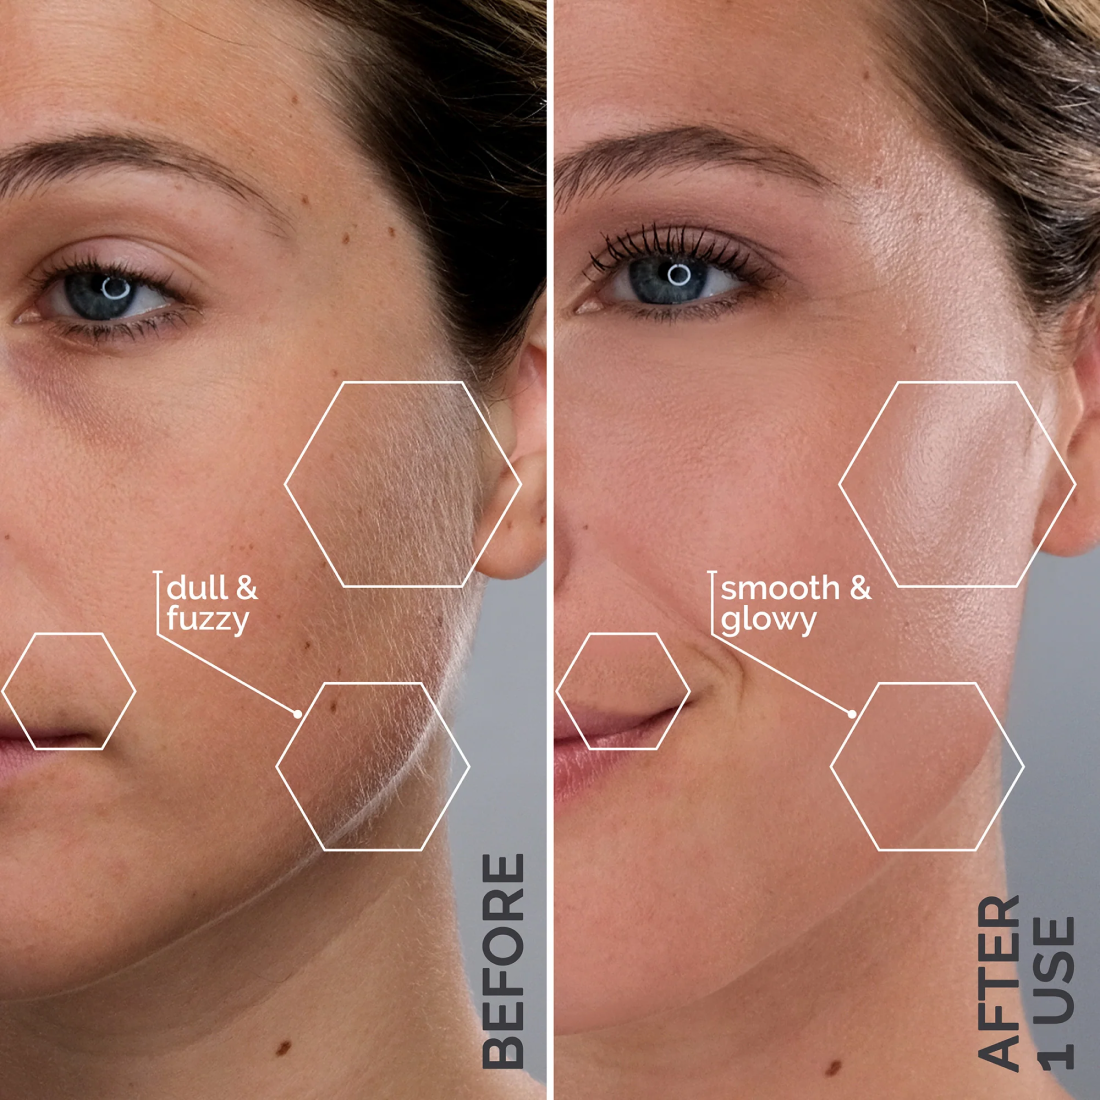 White . Close-up comparison of a woman's face before and after using Michael Todd Beauty's 4 in 1 Dermaplaning & Post Treatment System, showing dull and fuzzy skin versus smooth and glowy skin.